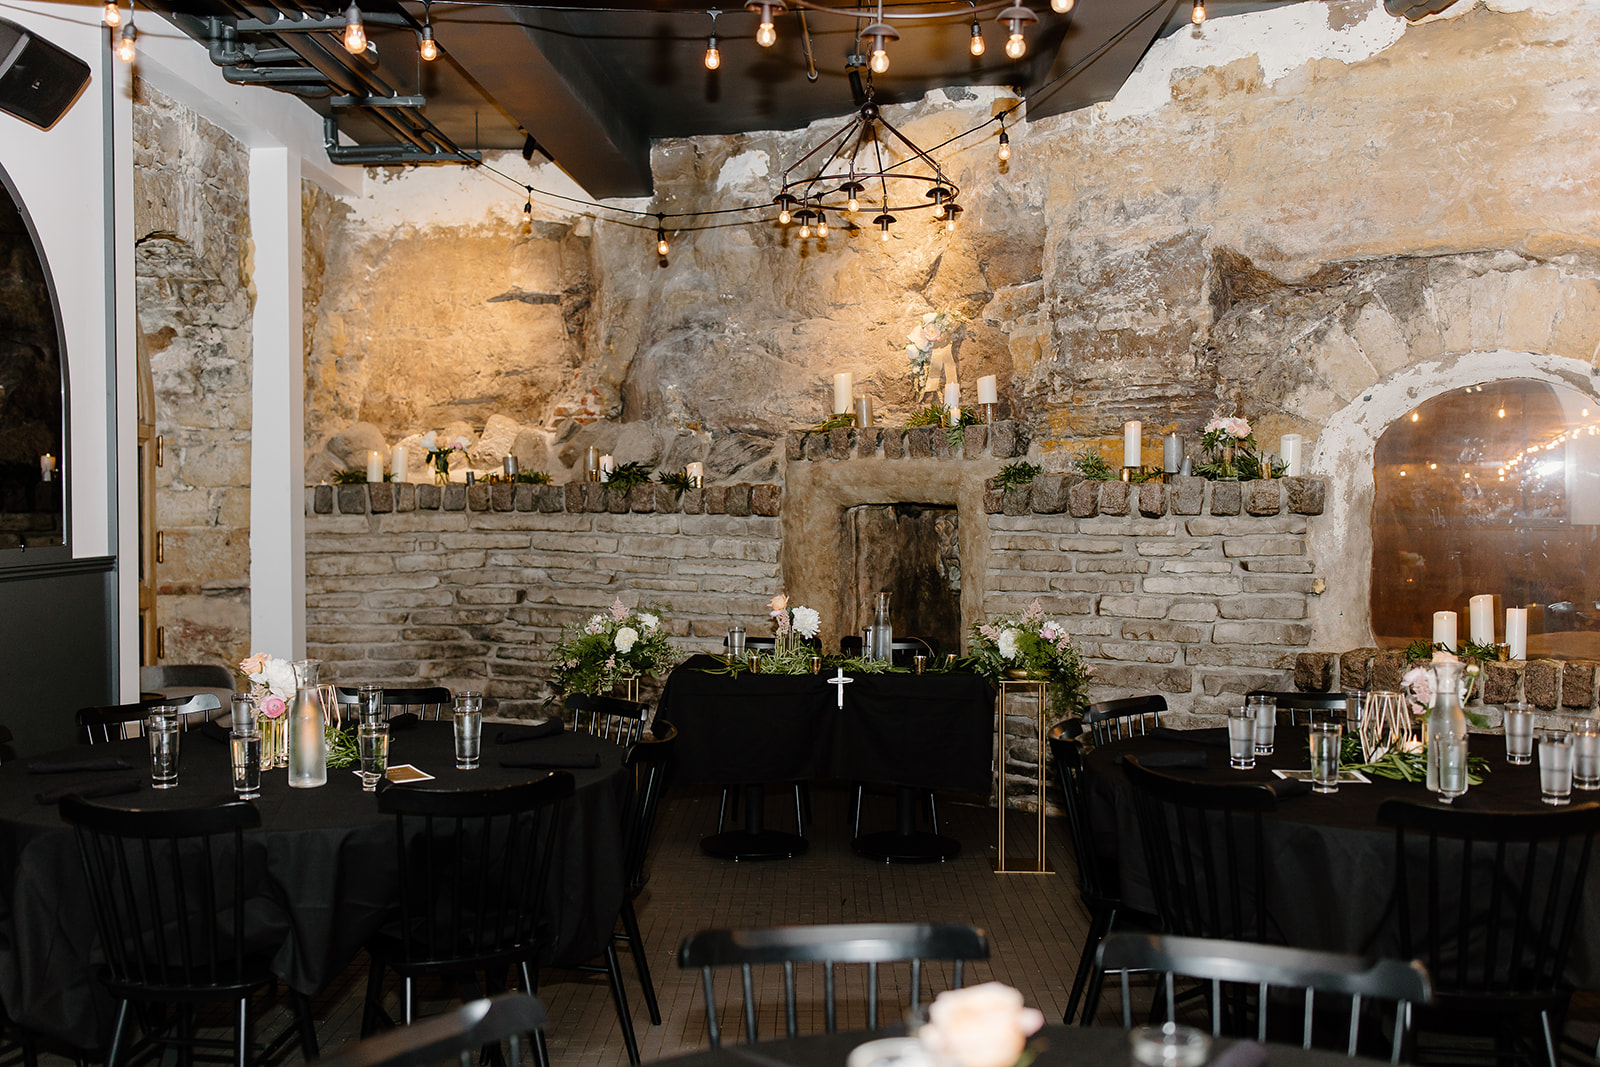 Wedding tables and chairs set up inside of a cave